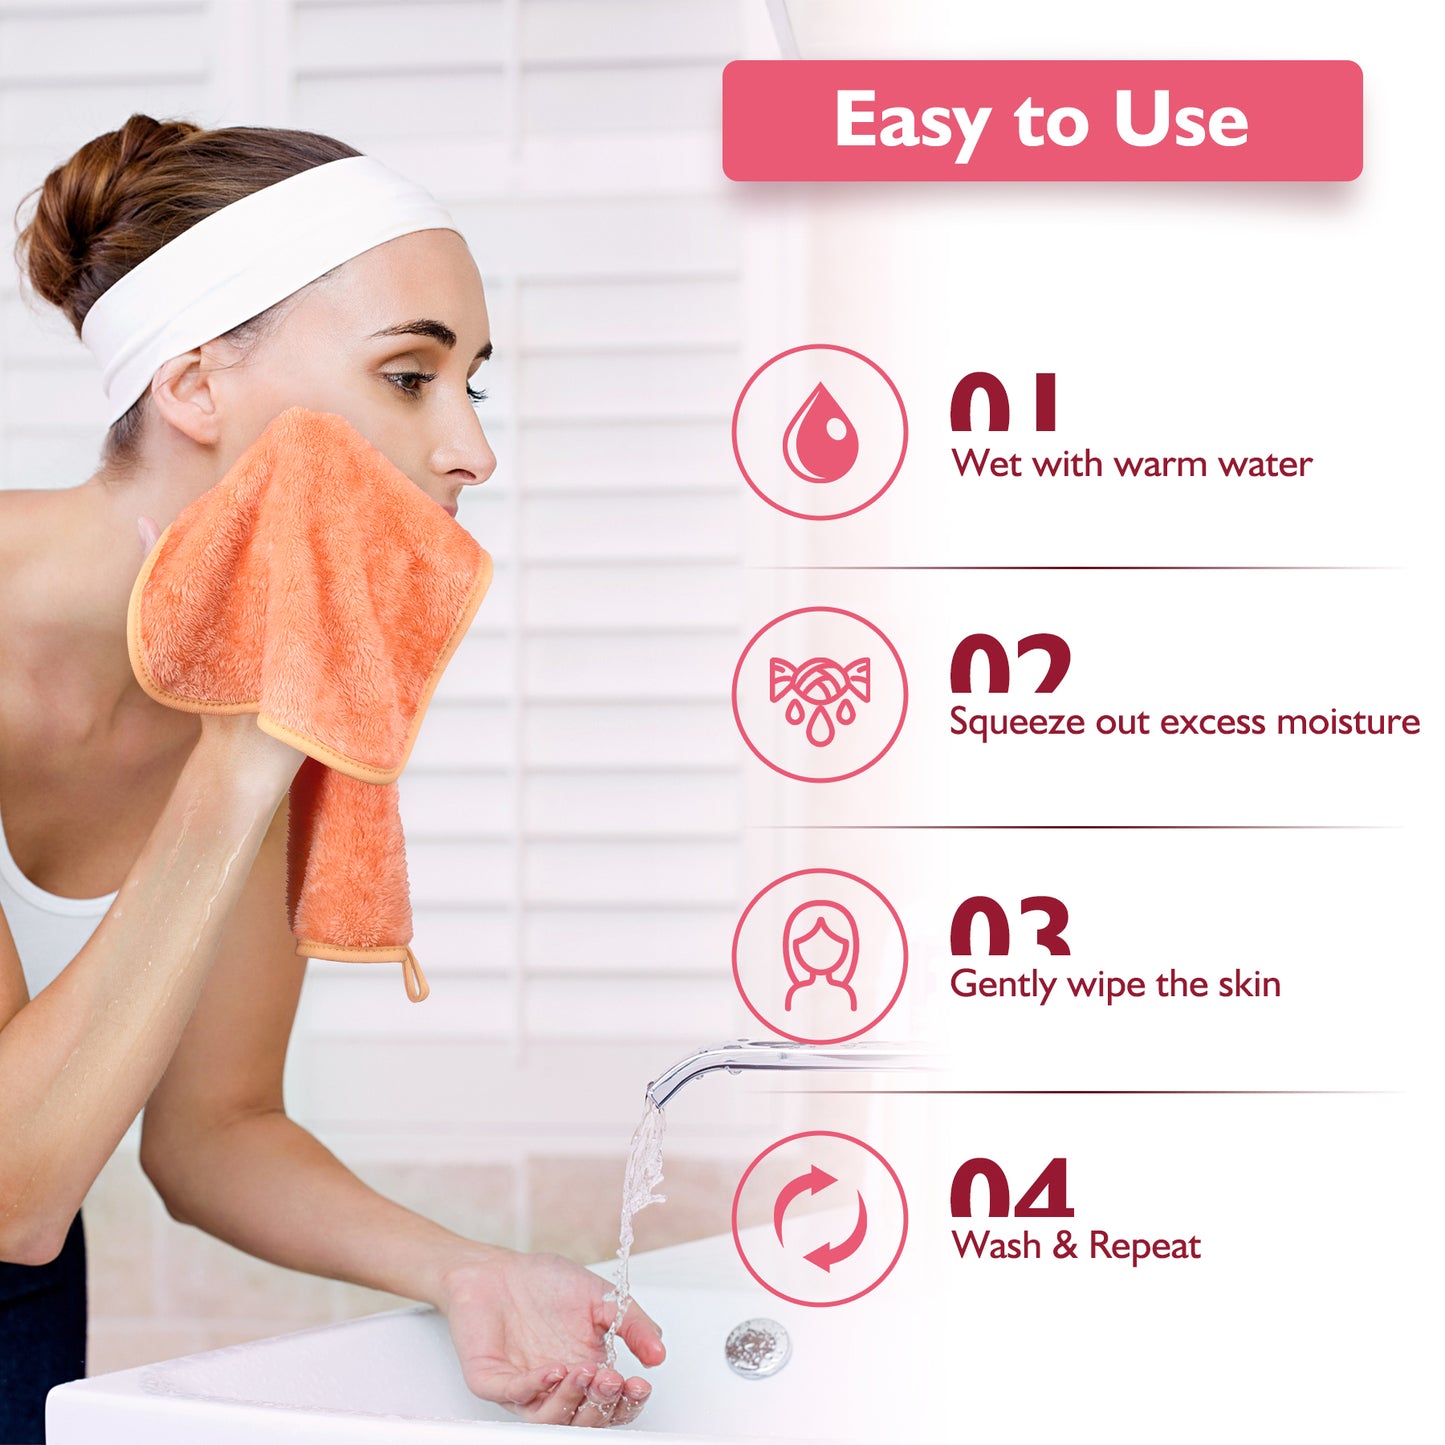 Nineigh Reusable Makeup Remover Cloth, 6 Pack Makeup Remover Pads Microfiber Flannel Facial Cleansing Cloth for Face Eyes Lips Make Up Removing, Suits All Skin Types(EU)